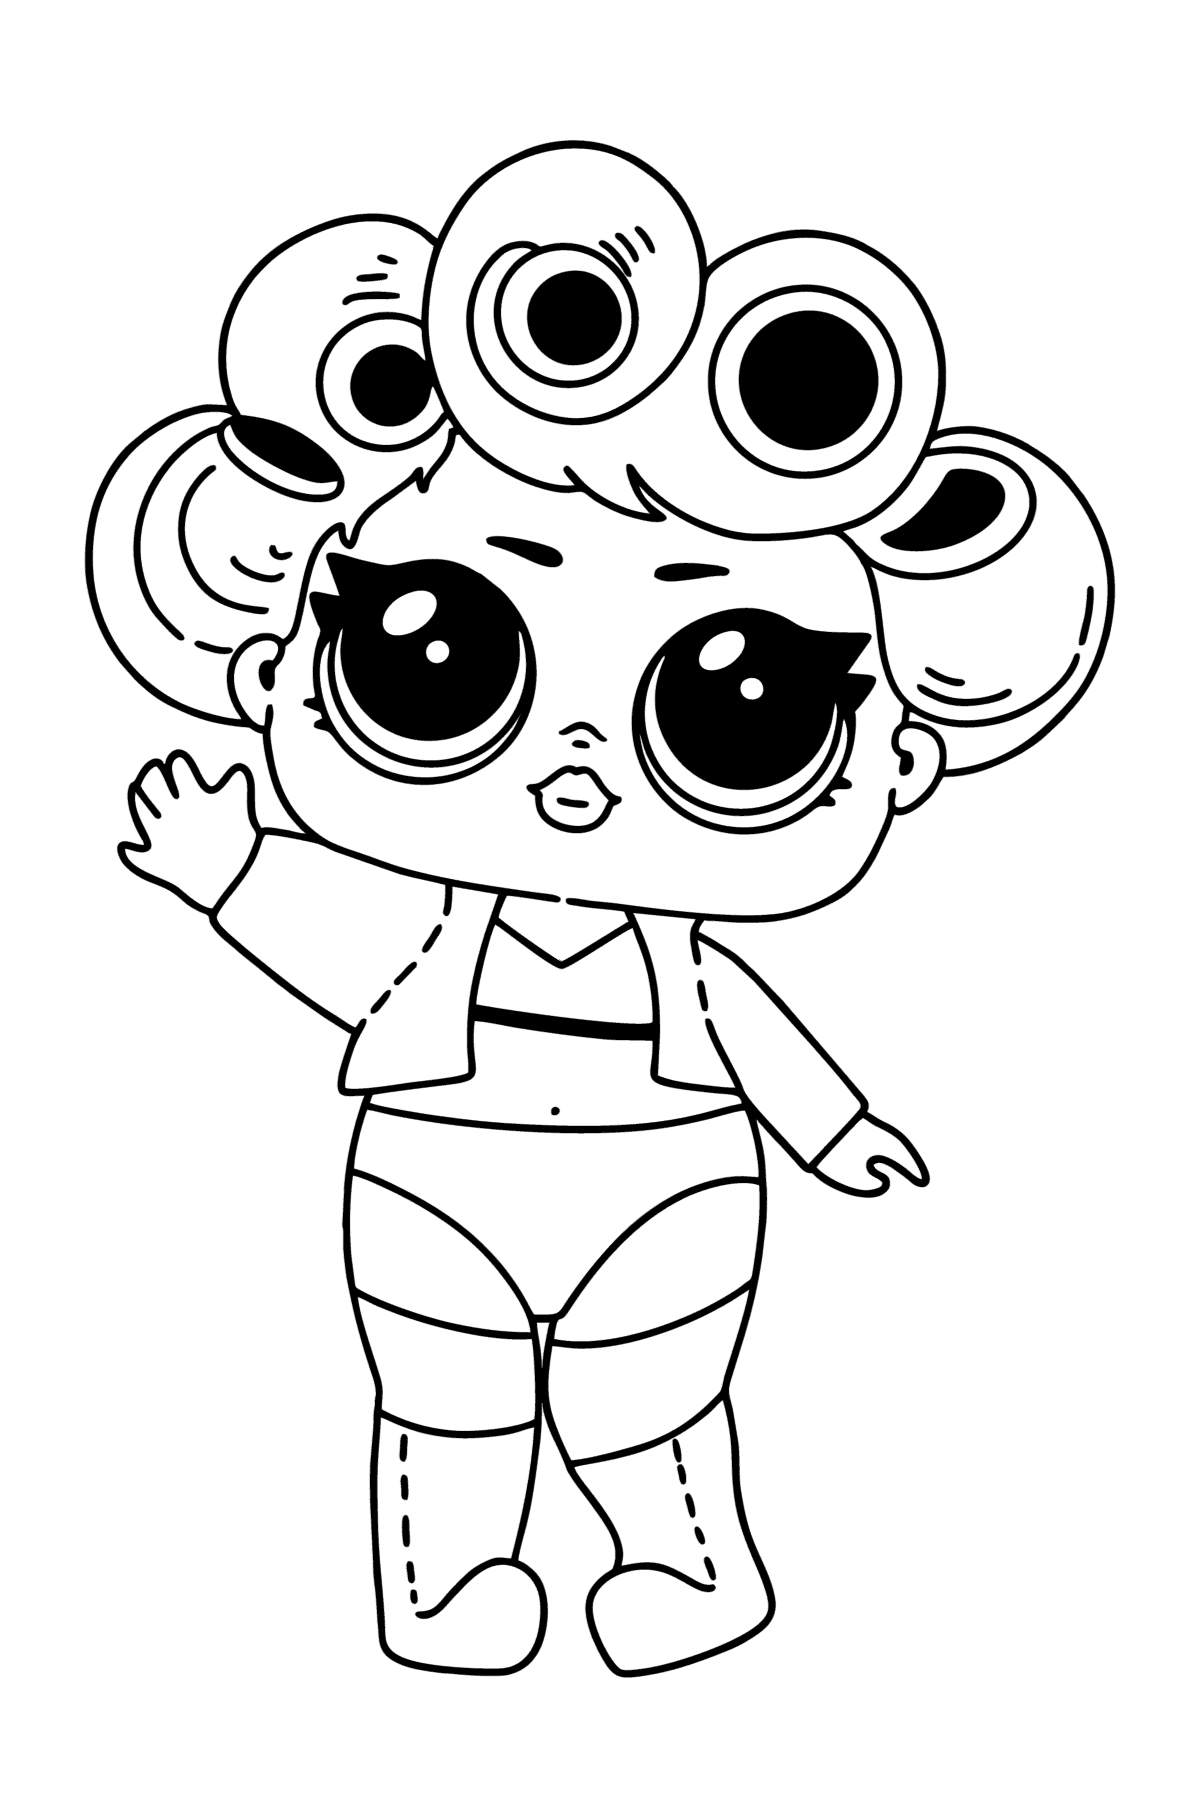 LOL Surprise Goo Goo Queen coloring page ♥ Online and Print for Free